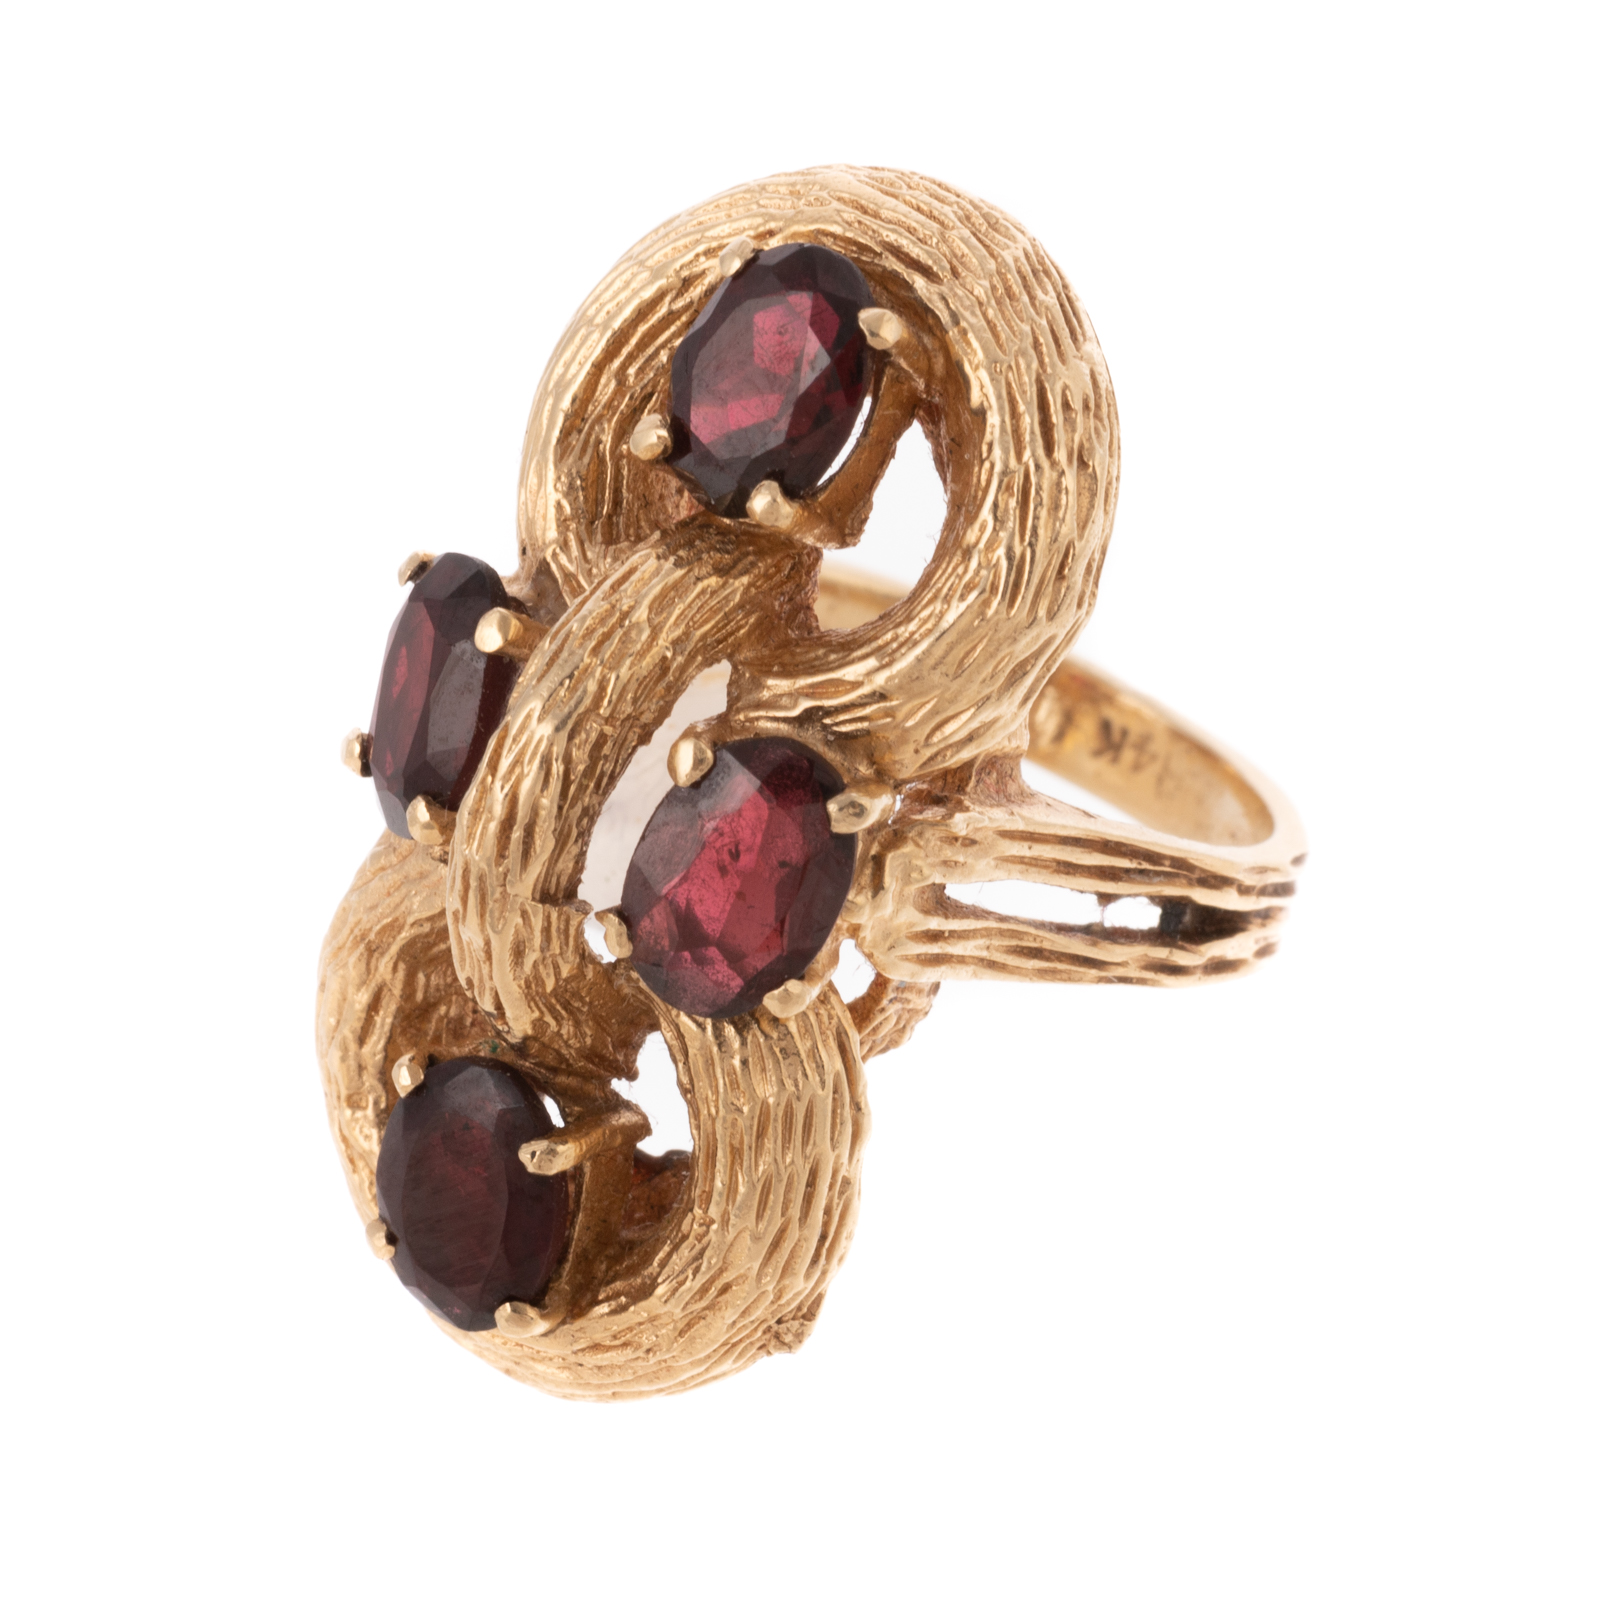 A TEXTURED KNOT RING WITH GARNETS